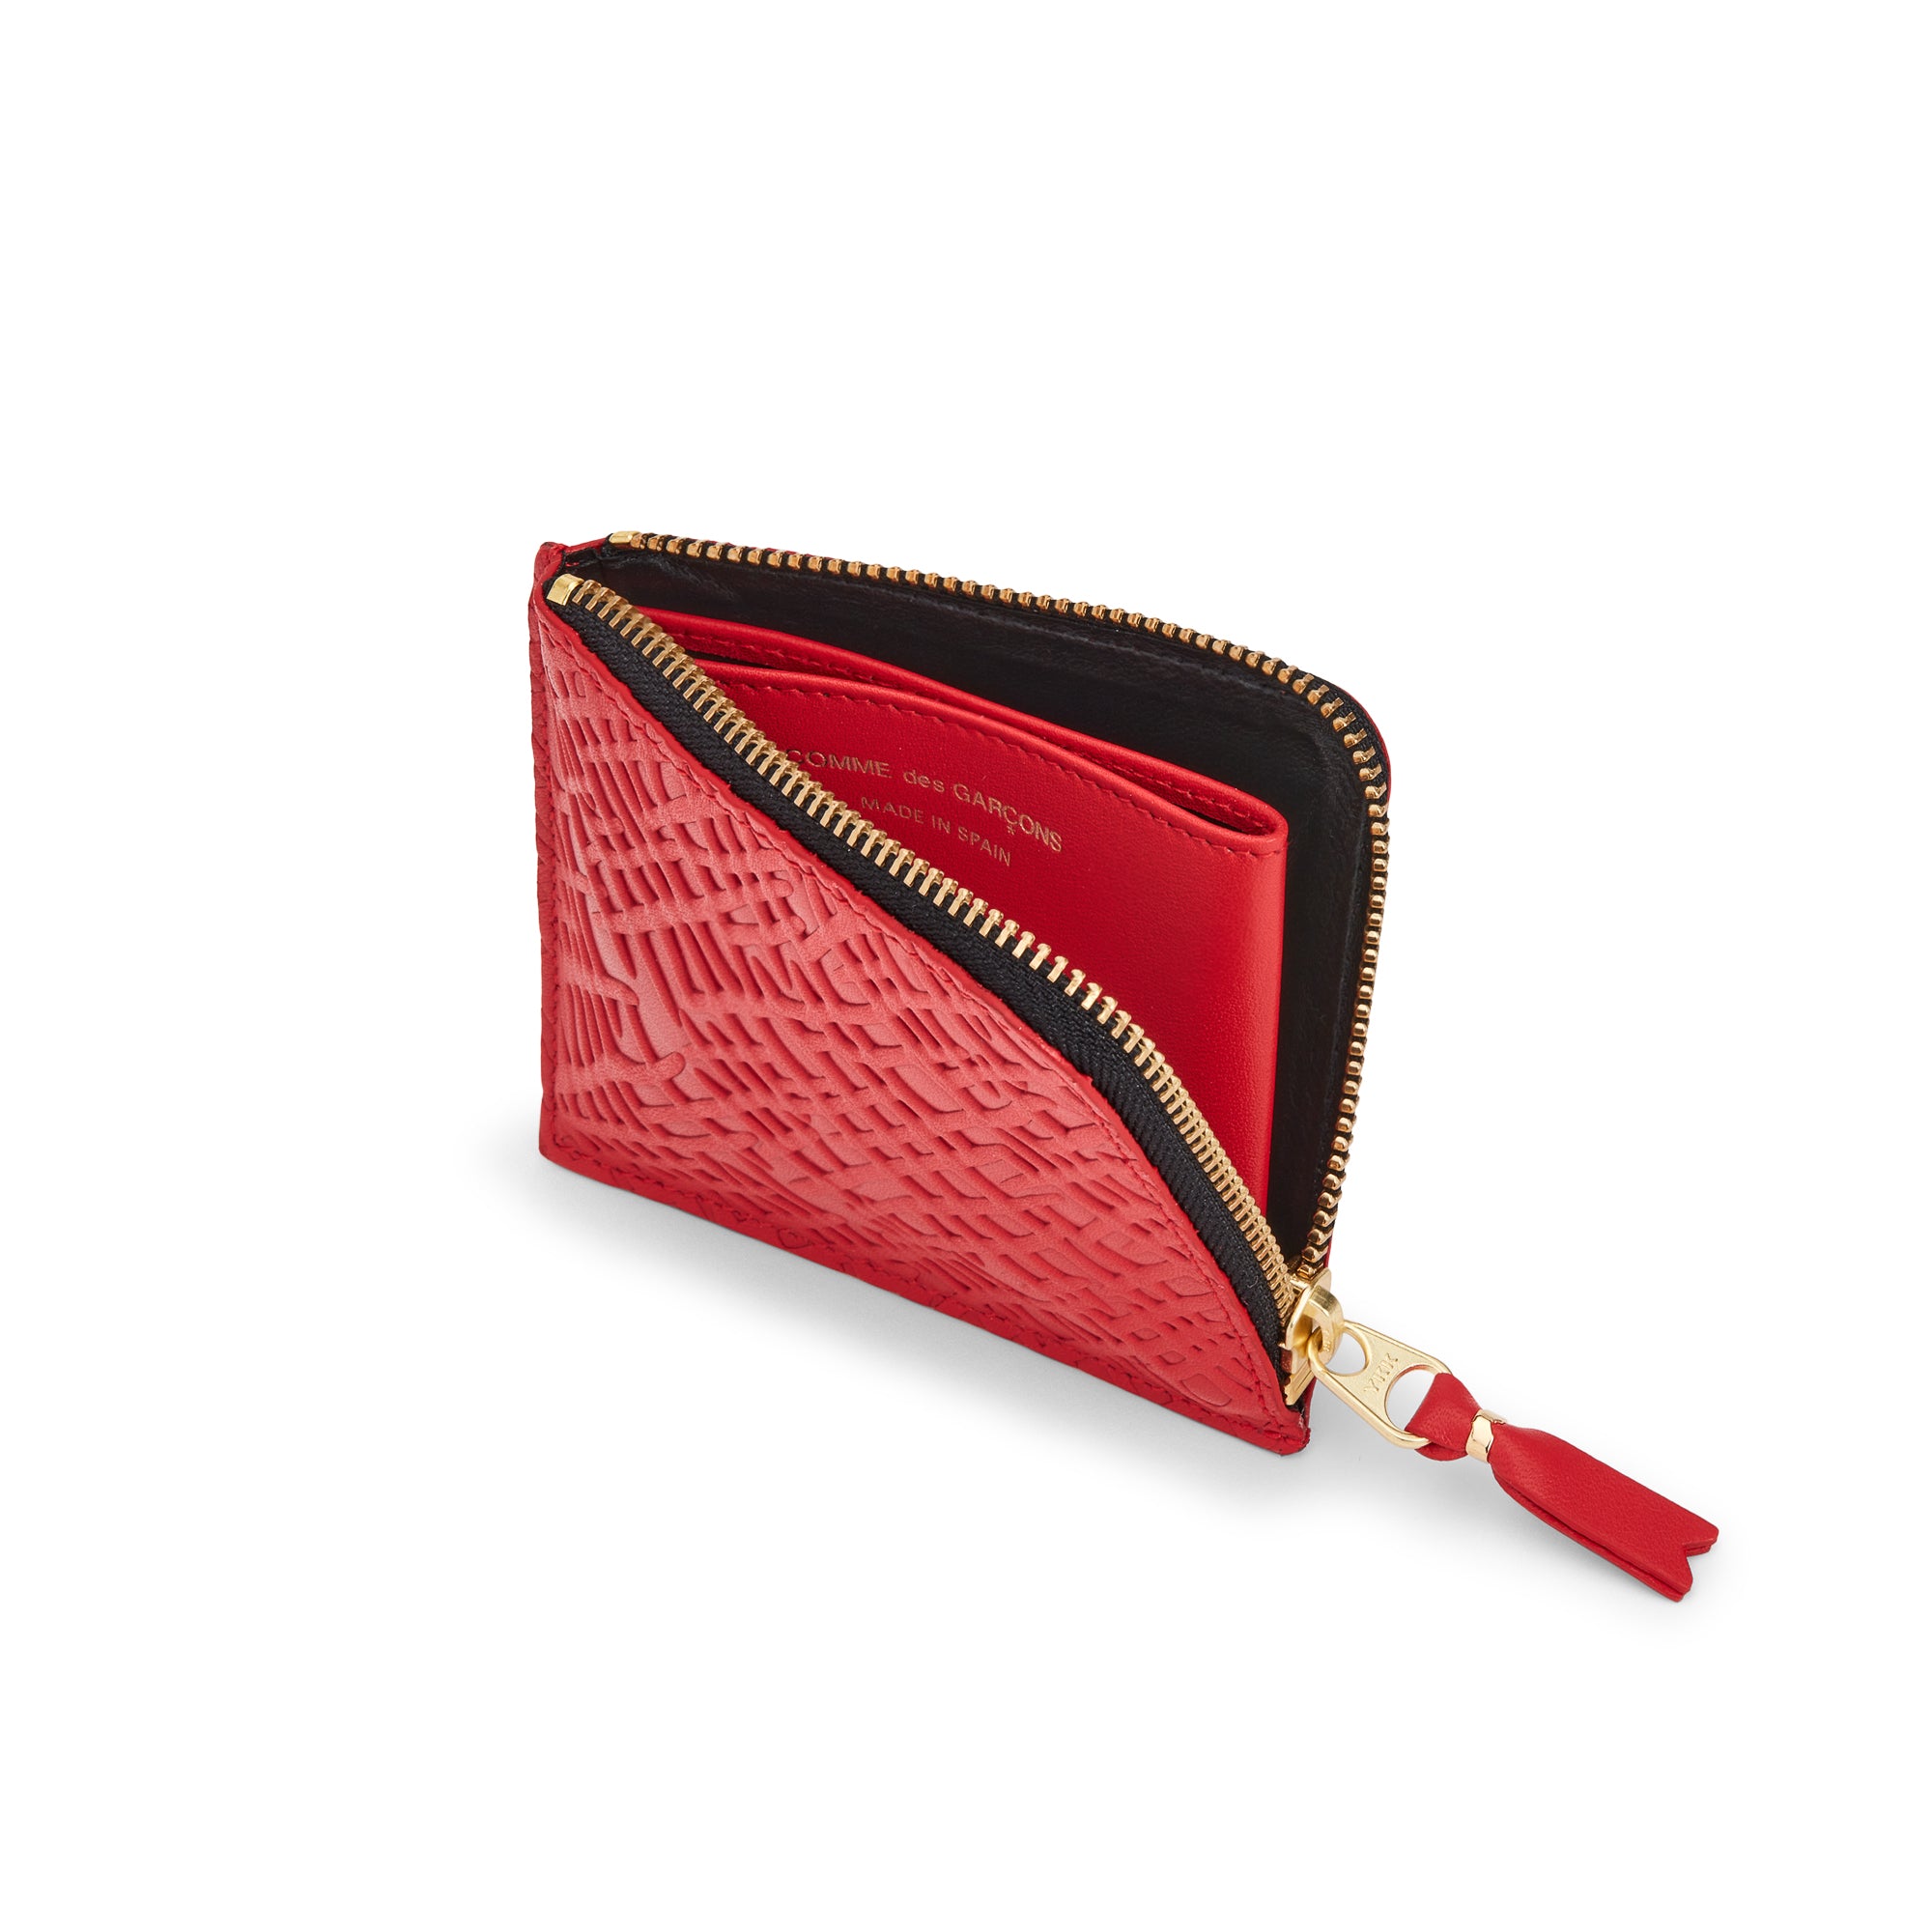 CDG Wallet - Embossed Roots Zip Around Wallet - (Red SA3100ER) view 3